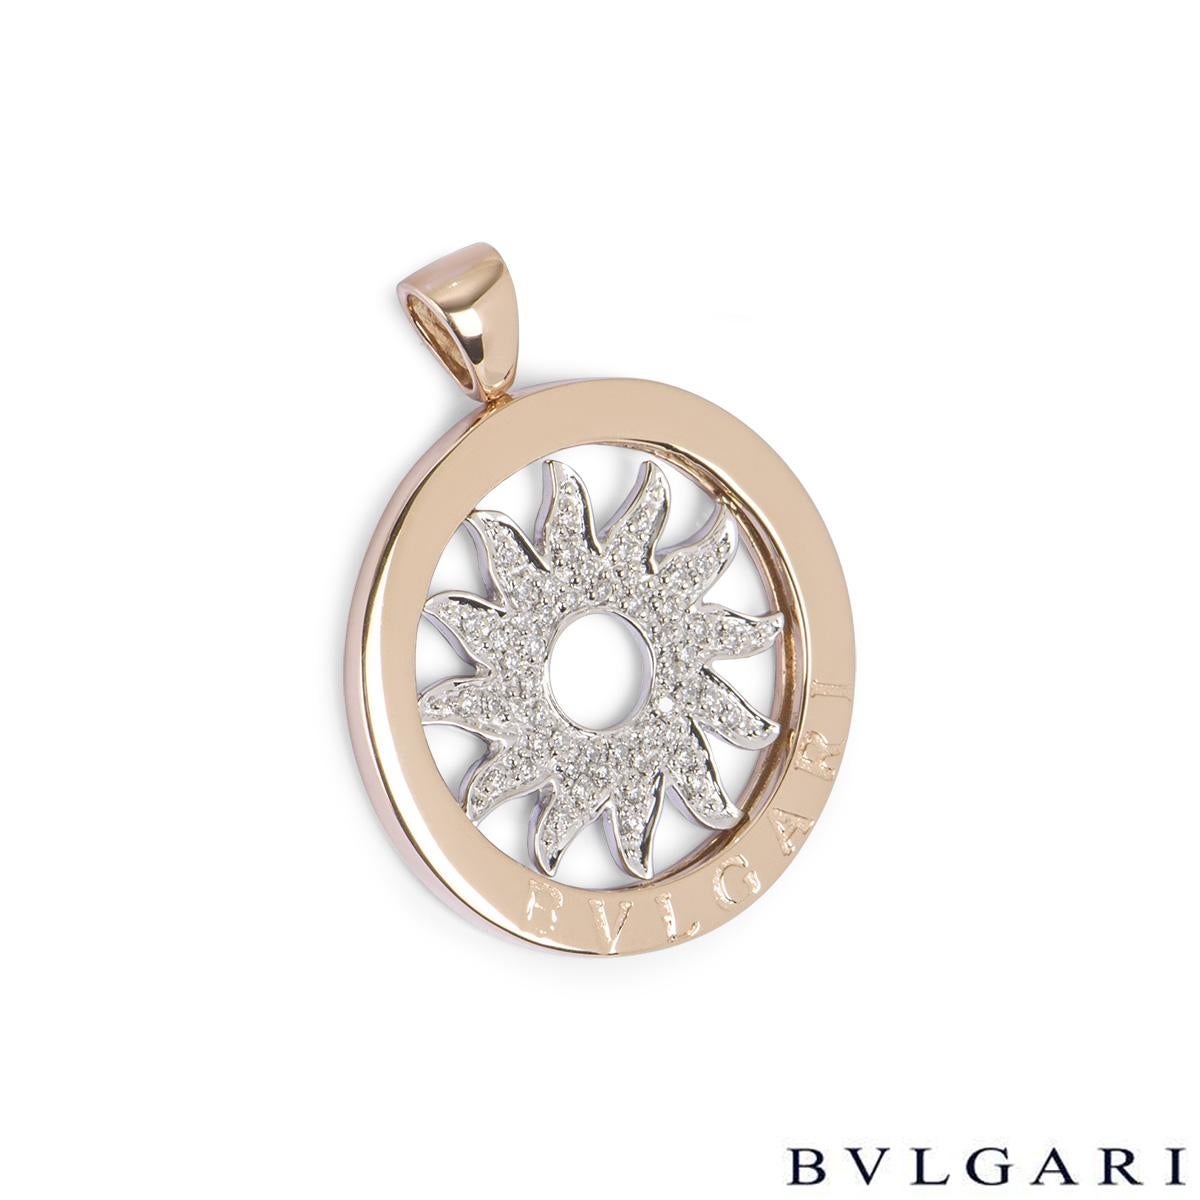 An 18k white and rose gold pendant from the Tondo collection by Bvlgari. The pendant features a diamond set spinning sun motif in the centre with a rose gold boarder displaying the Bvlgari logo. The pendant measures 2.7cm in diameter and has a gross